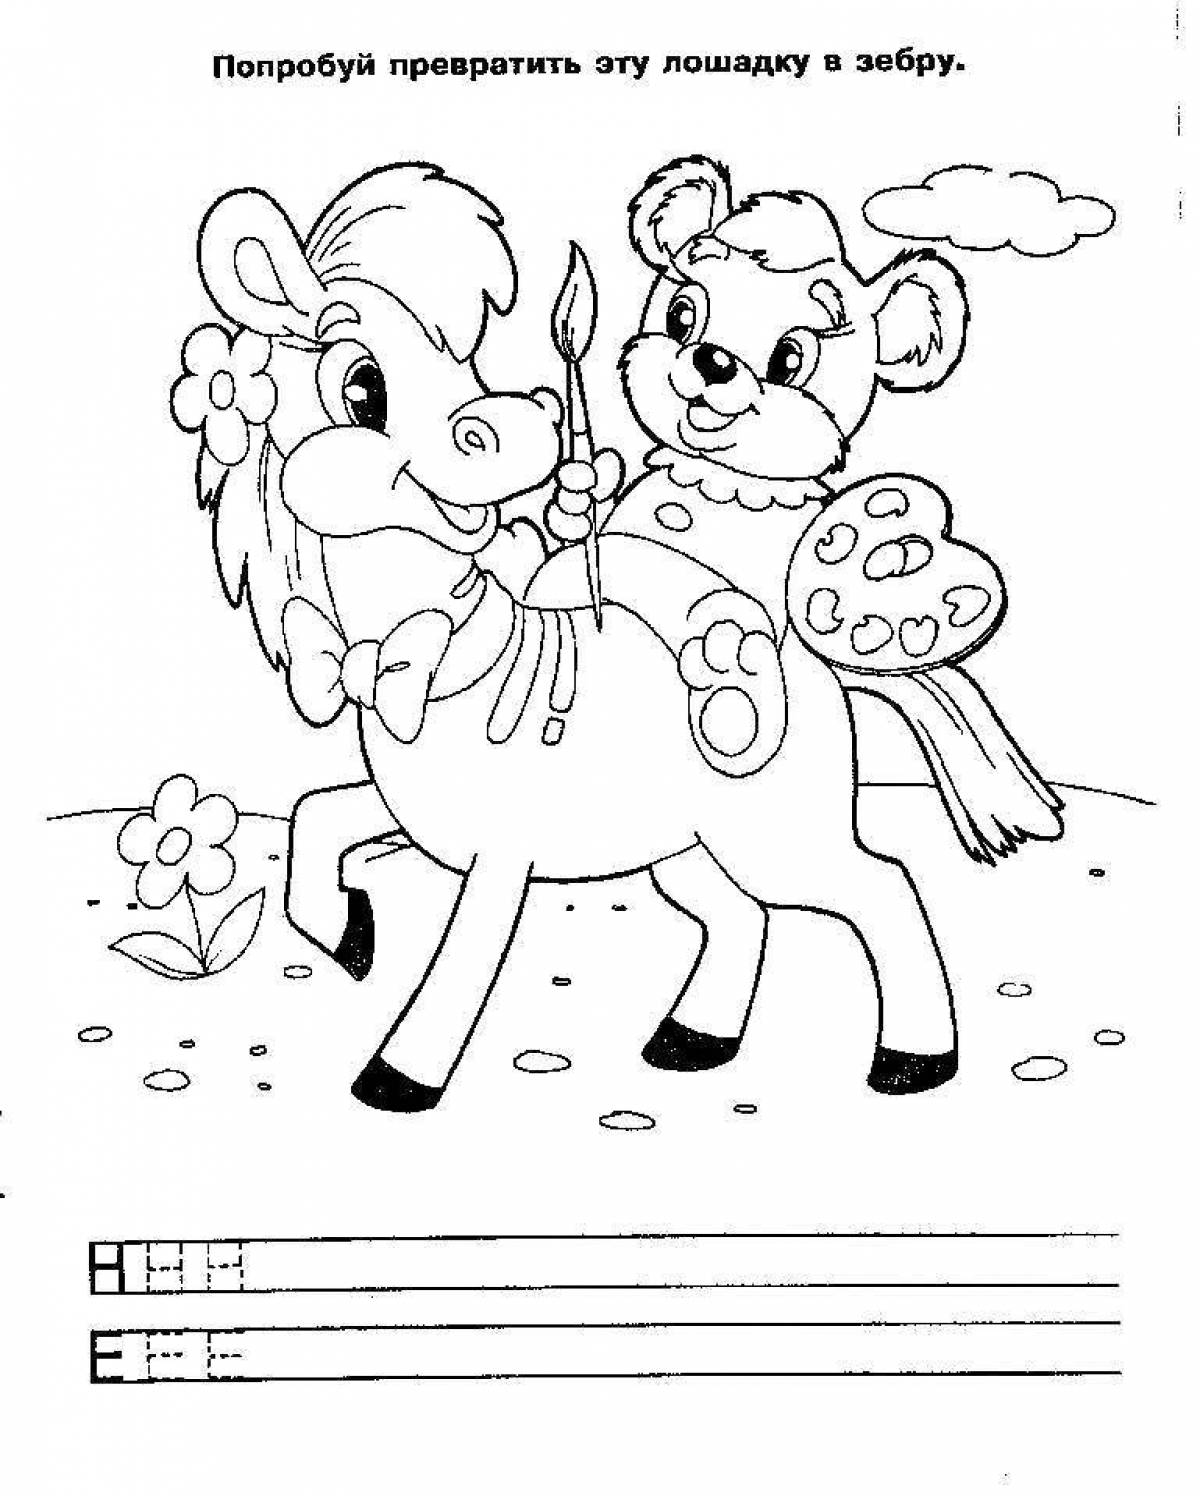 Fun coloring book smart for 6-7 year olds